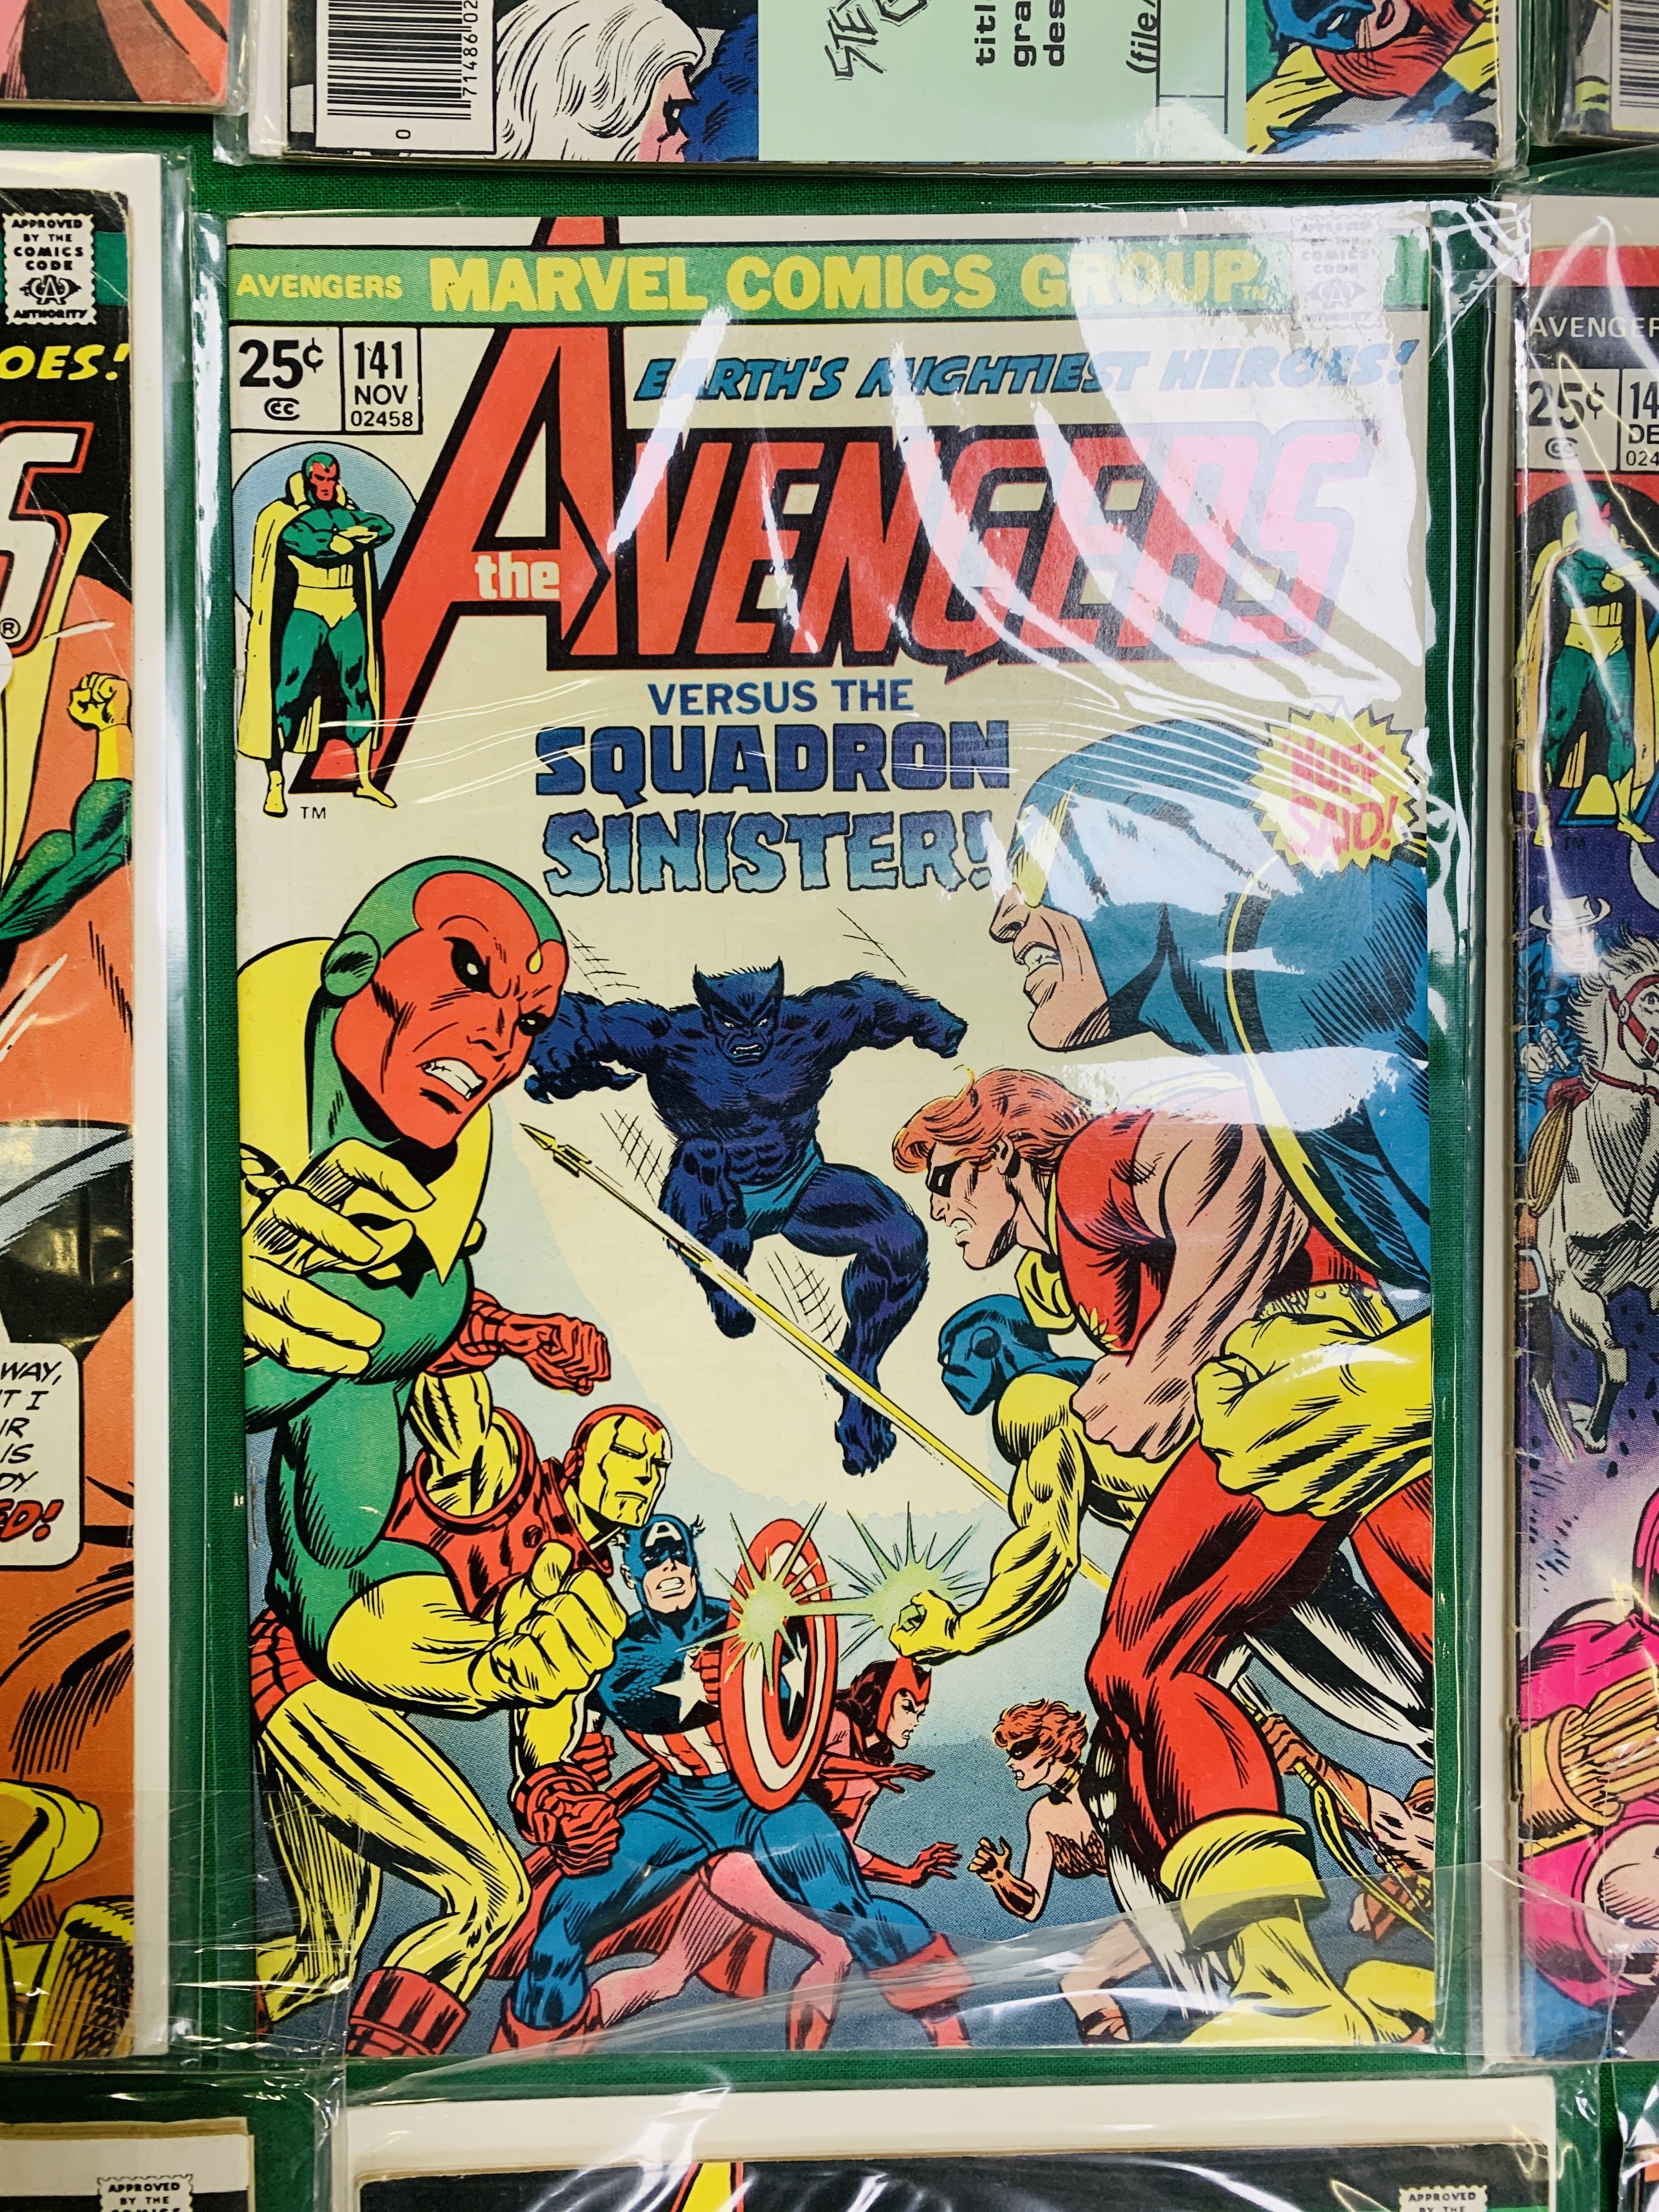 MARVEL COMICS THE AVENGERS NO. 101 - 299, MISSING ISSUES 103 AND 110. - Image 27 of 130